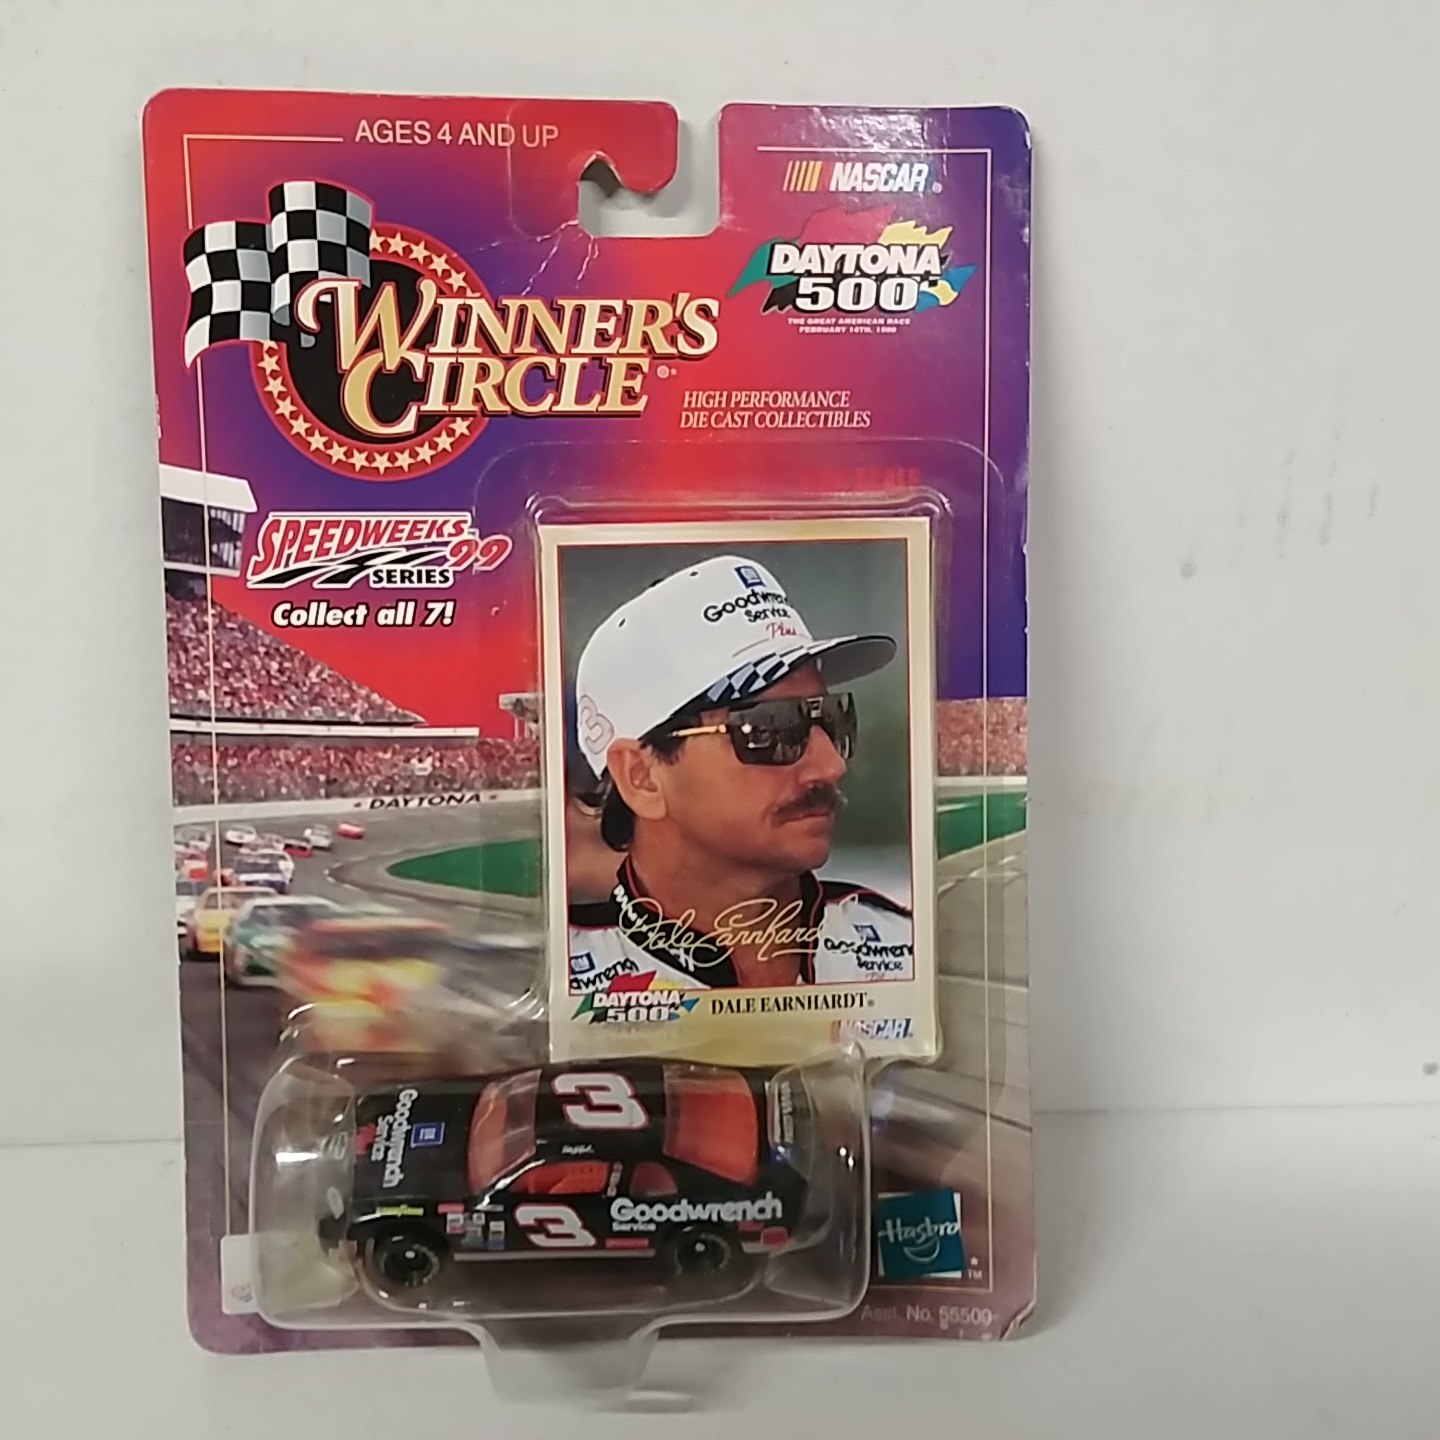 1999 Dale Earnhardt 1/64th Goodwrench "Speedweeks" Monte Carlo